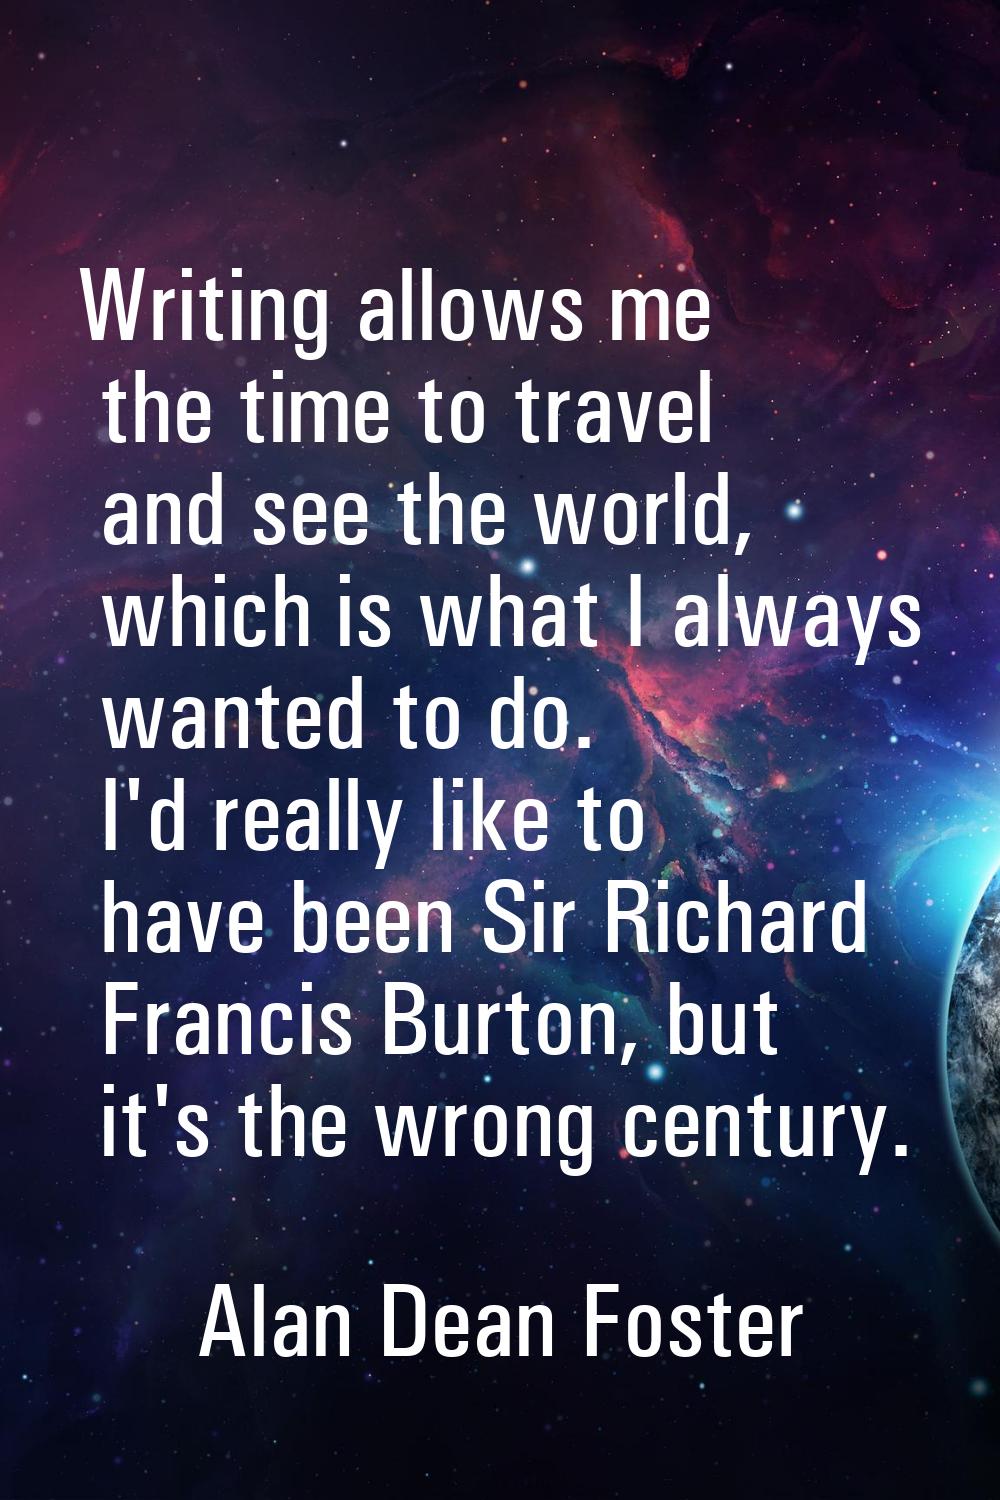 Writing allows me the time to travel and see the world, which is what I always wanted to do. I'd re